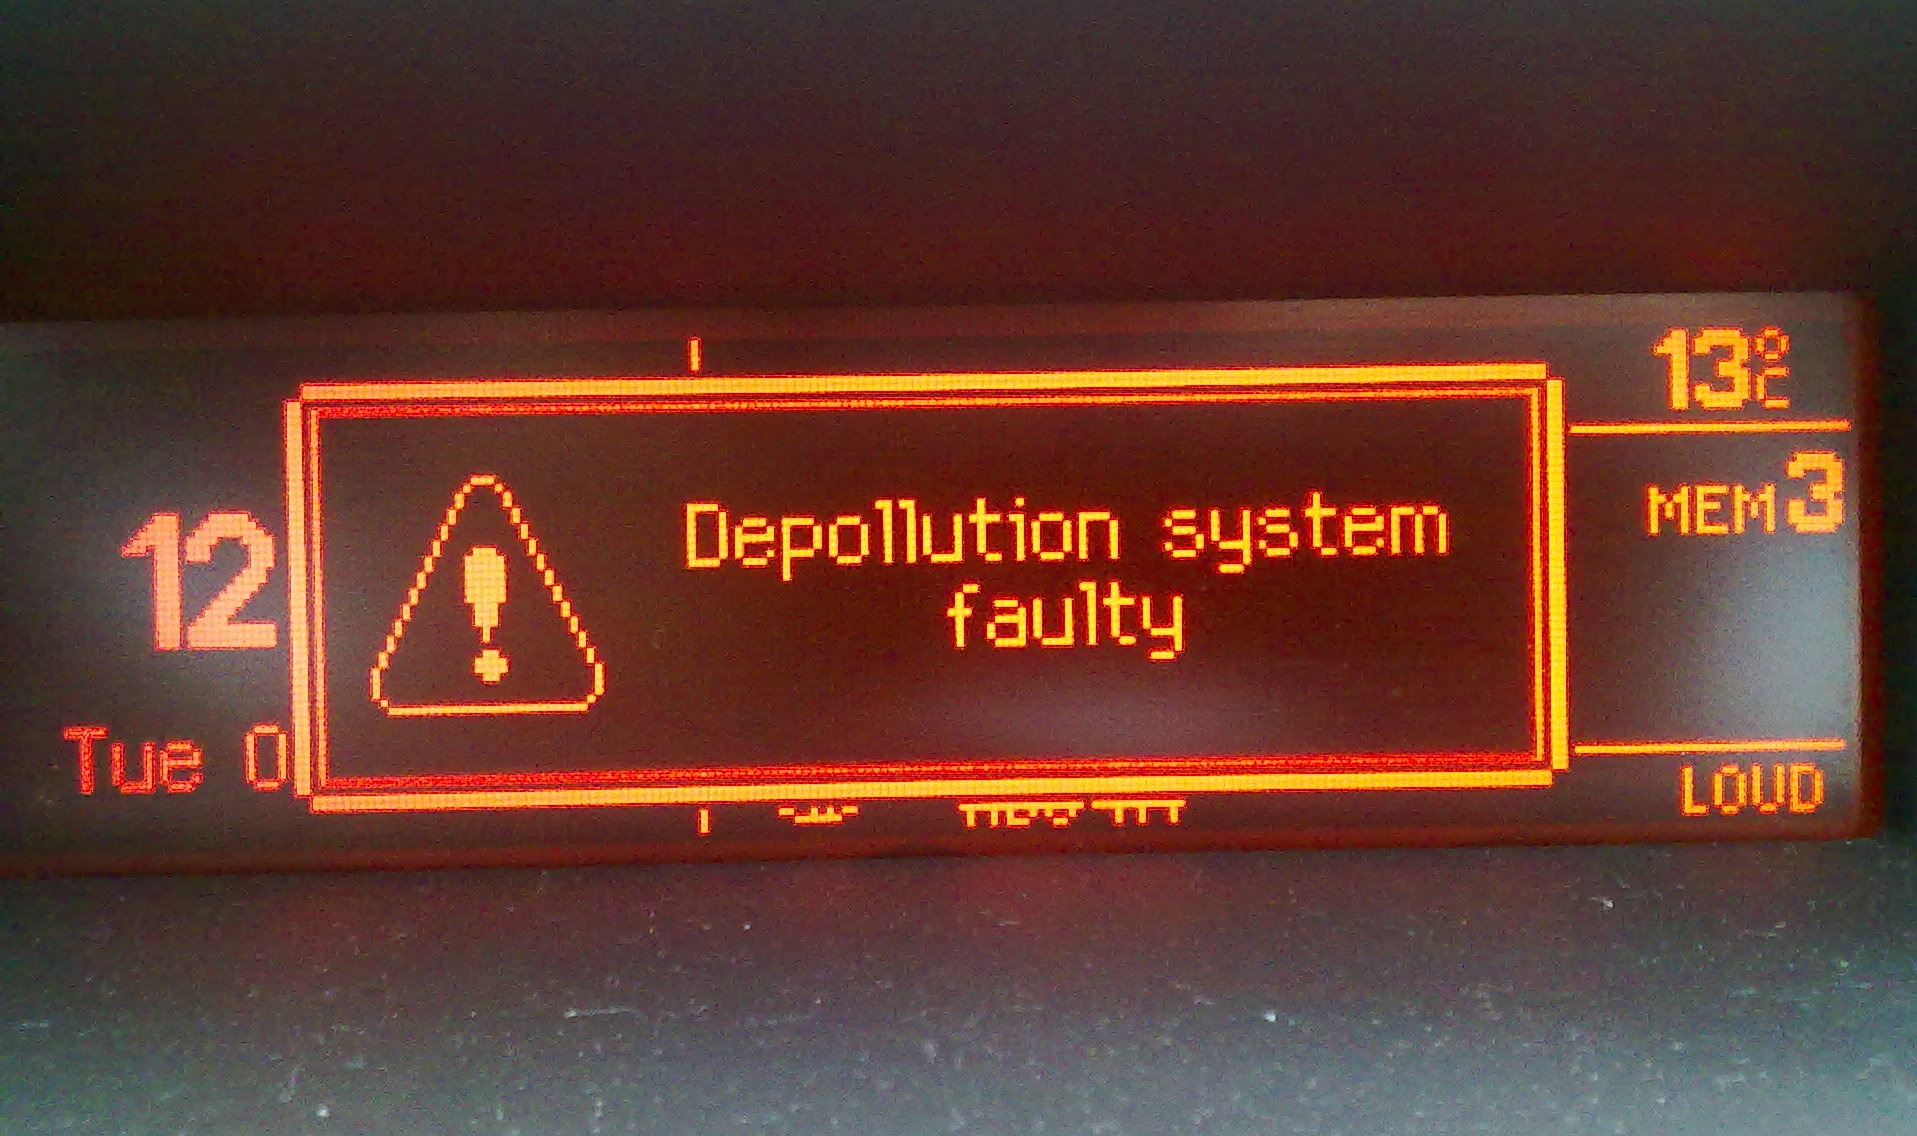 Depollution system faulty